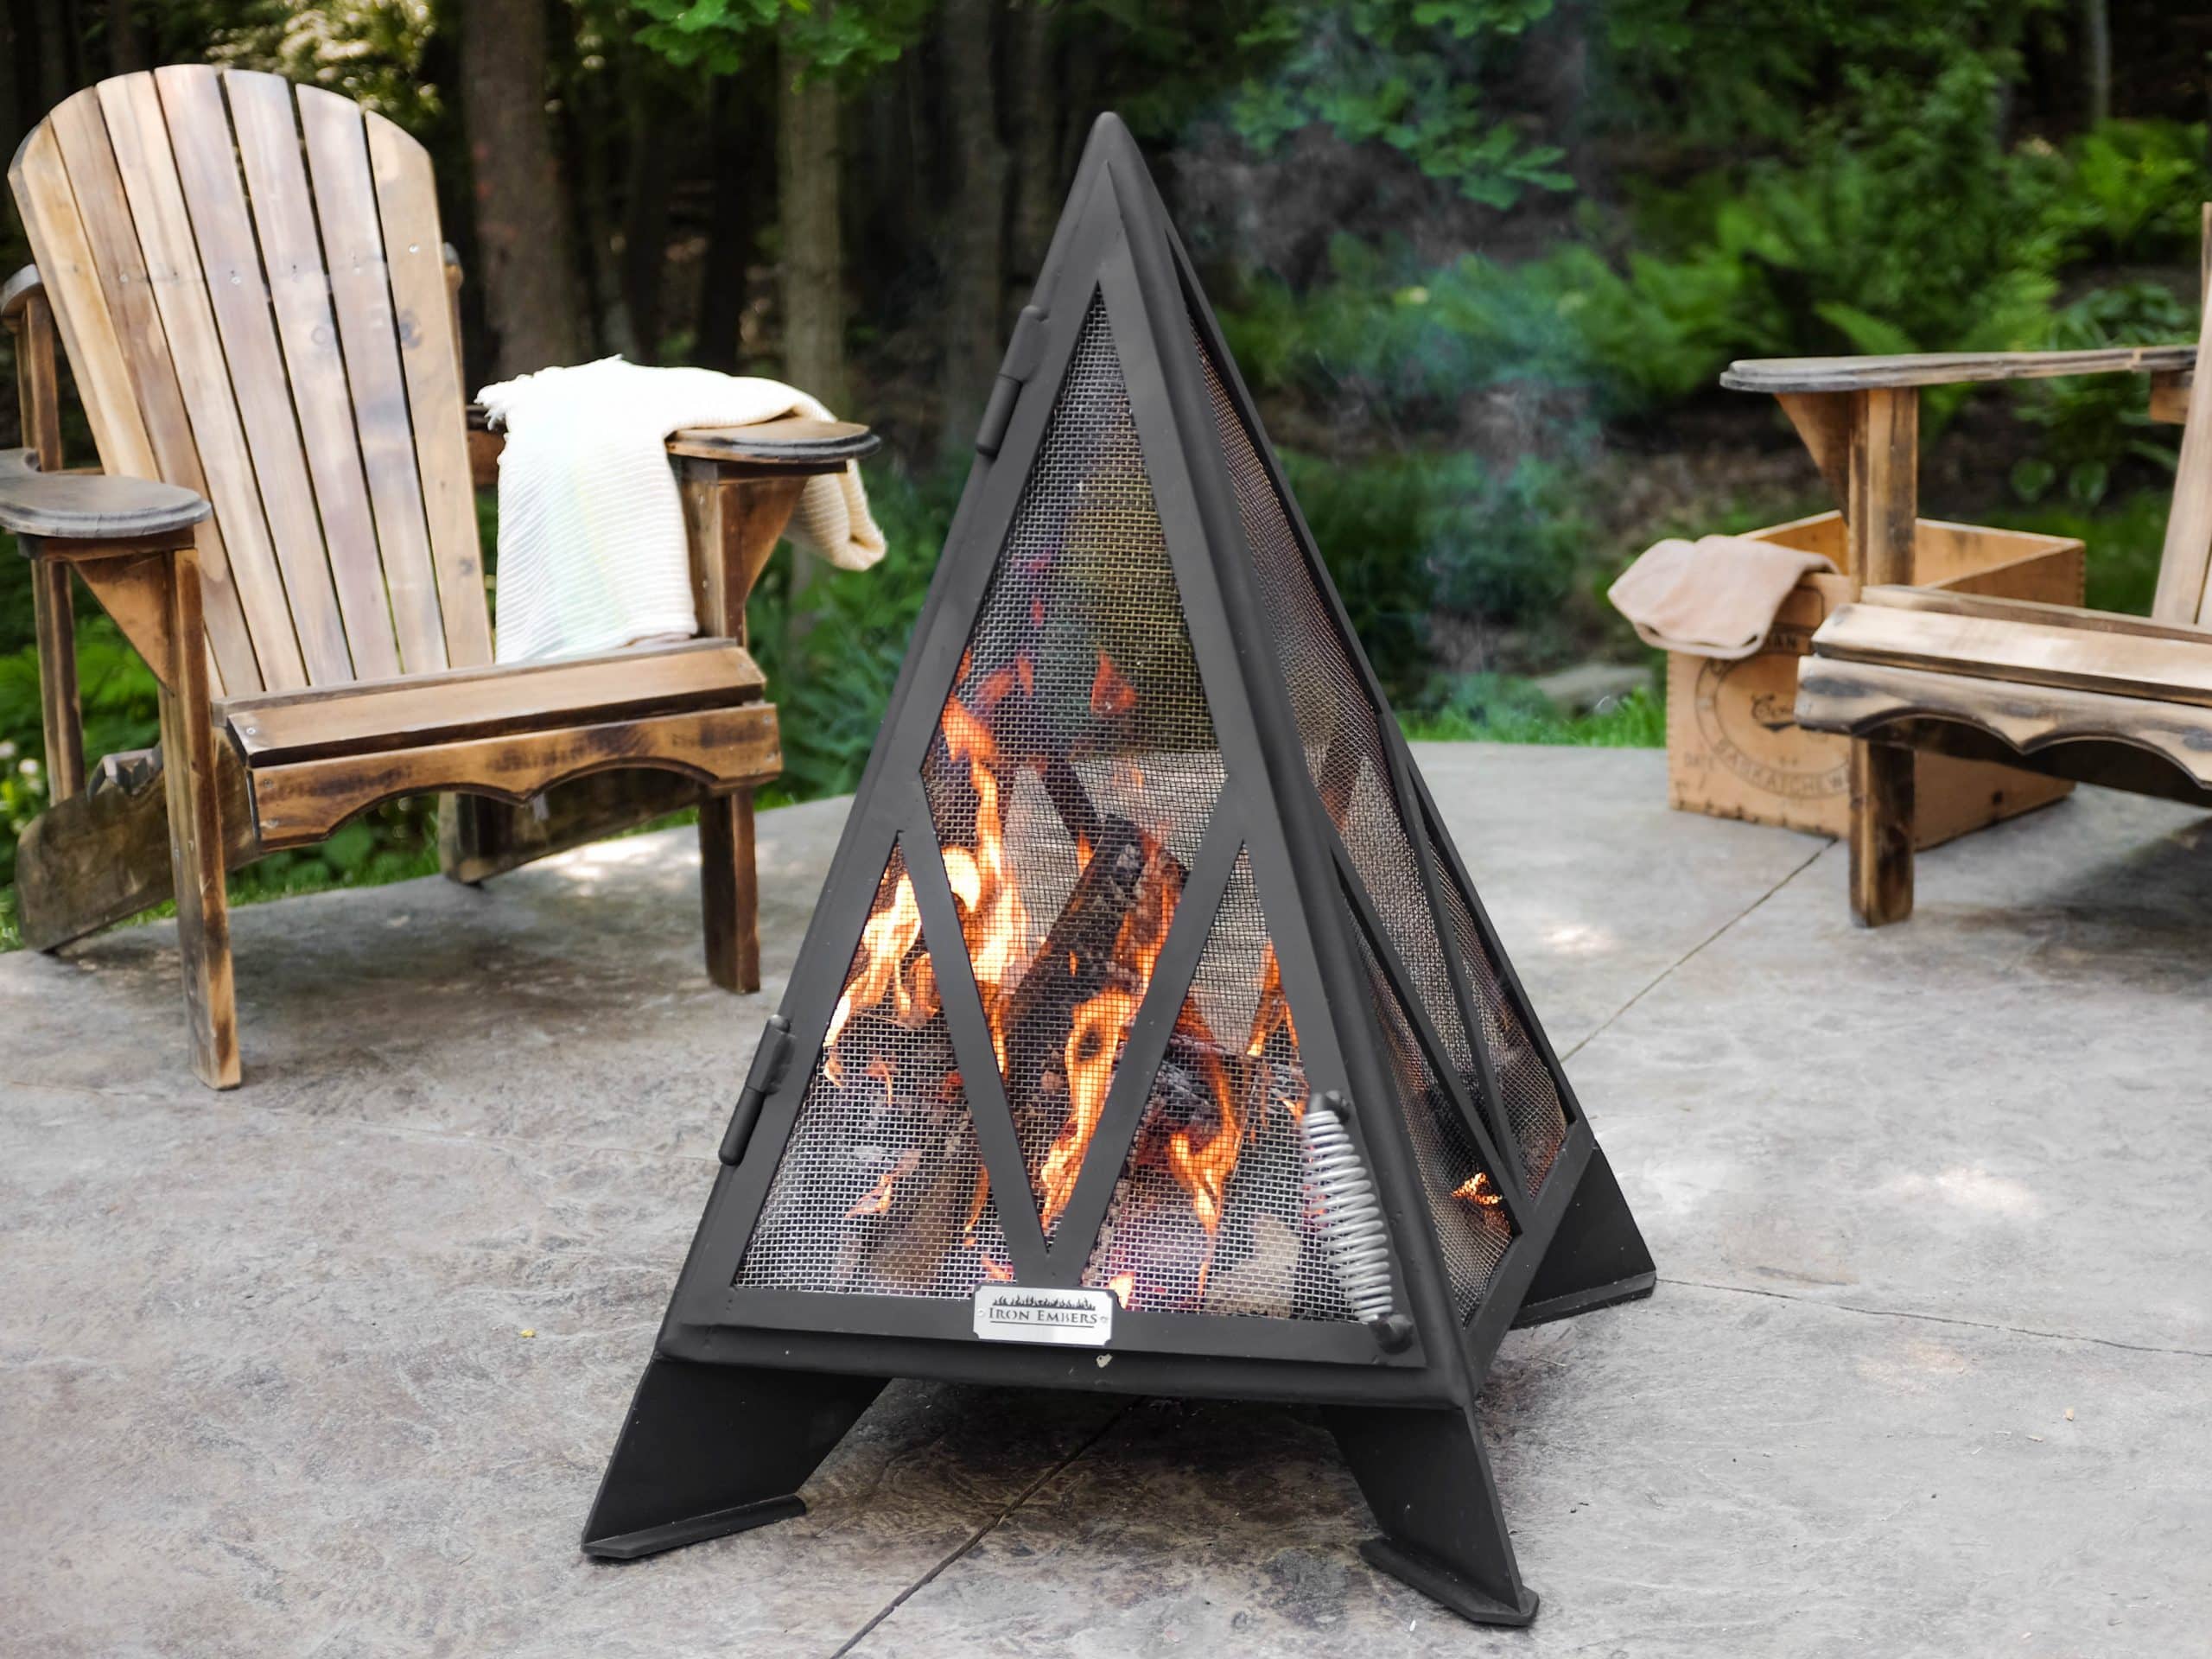 3' Pyramid Fireplace on a patio surrounded by Muskoka chairs